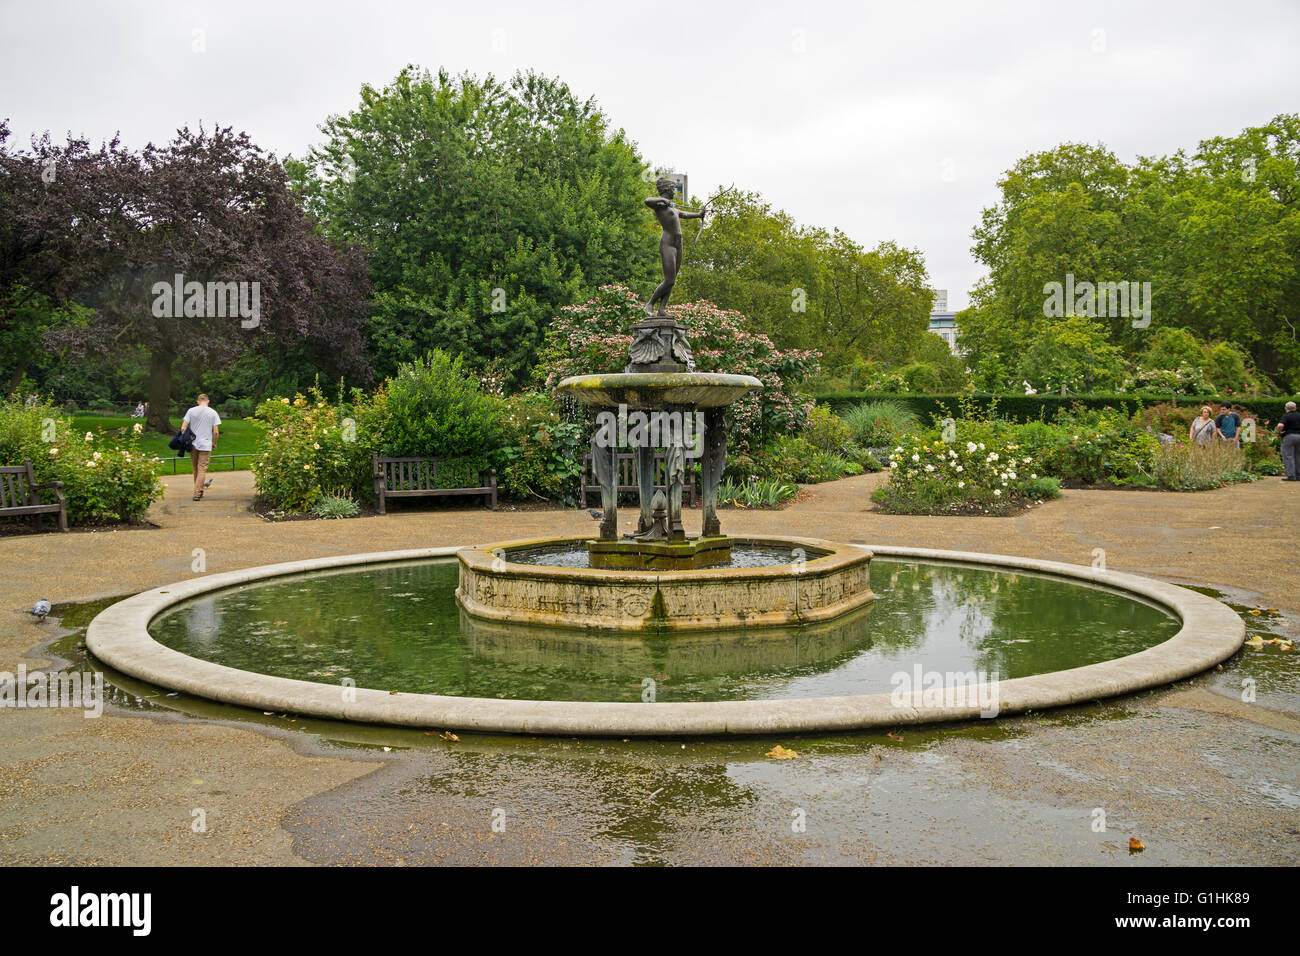 Artemis Fountain in Hyde Park, London on a cloudy day Stock Photo